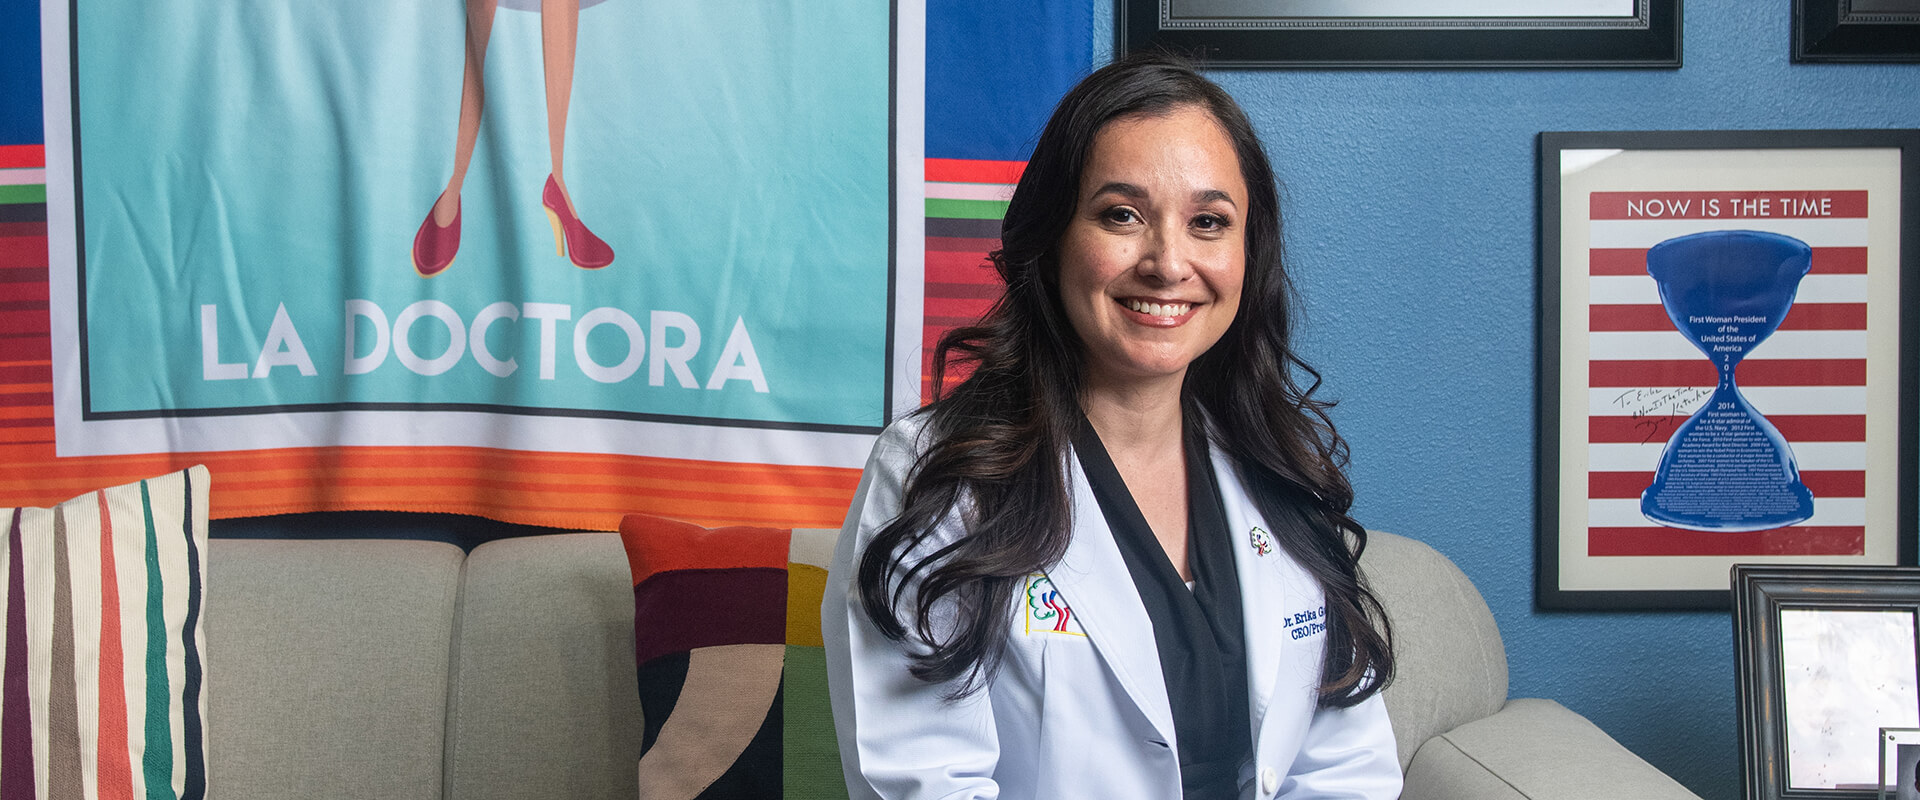 Dr. Erika Gonzalez in her white coat sitting in her office with La Doctora tapestry behind her